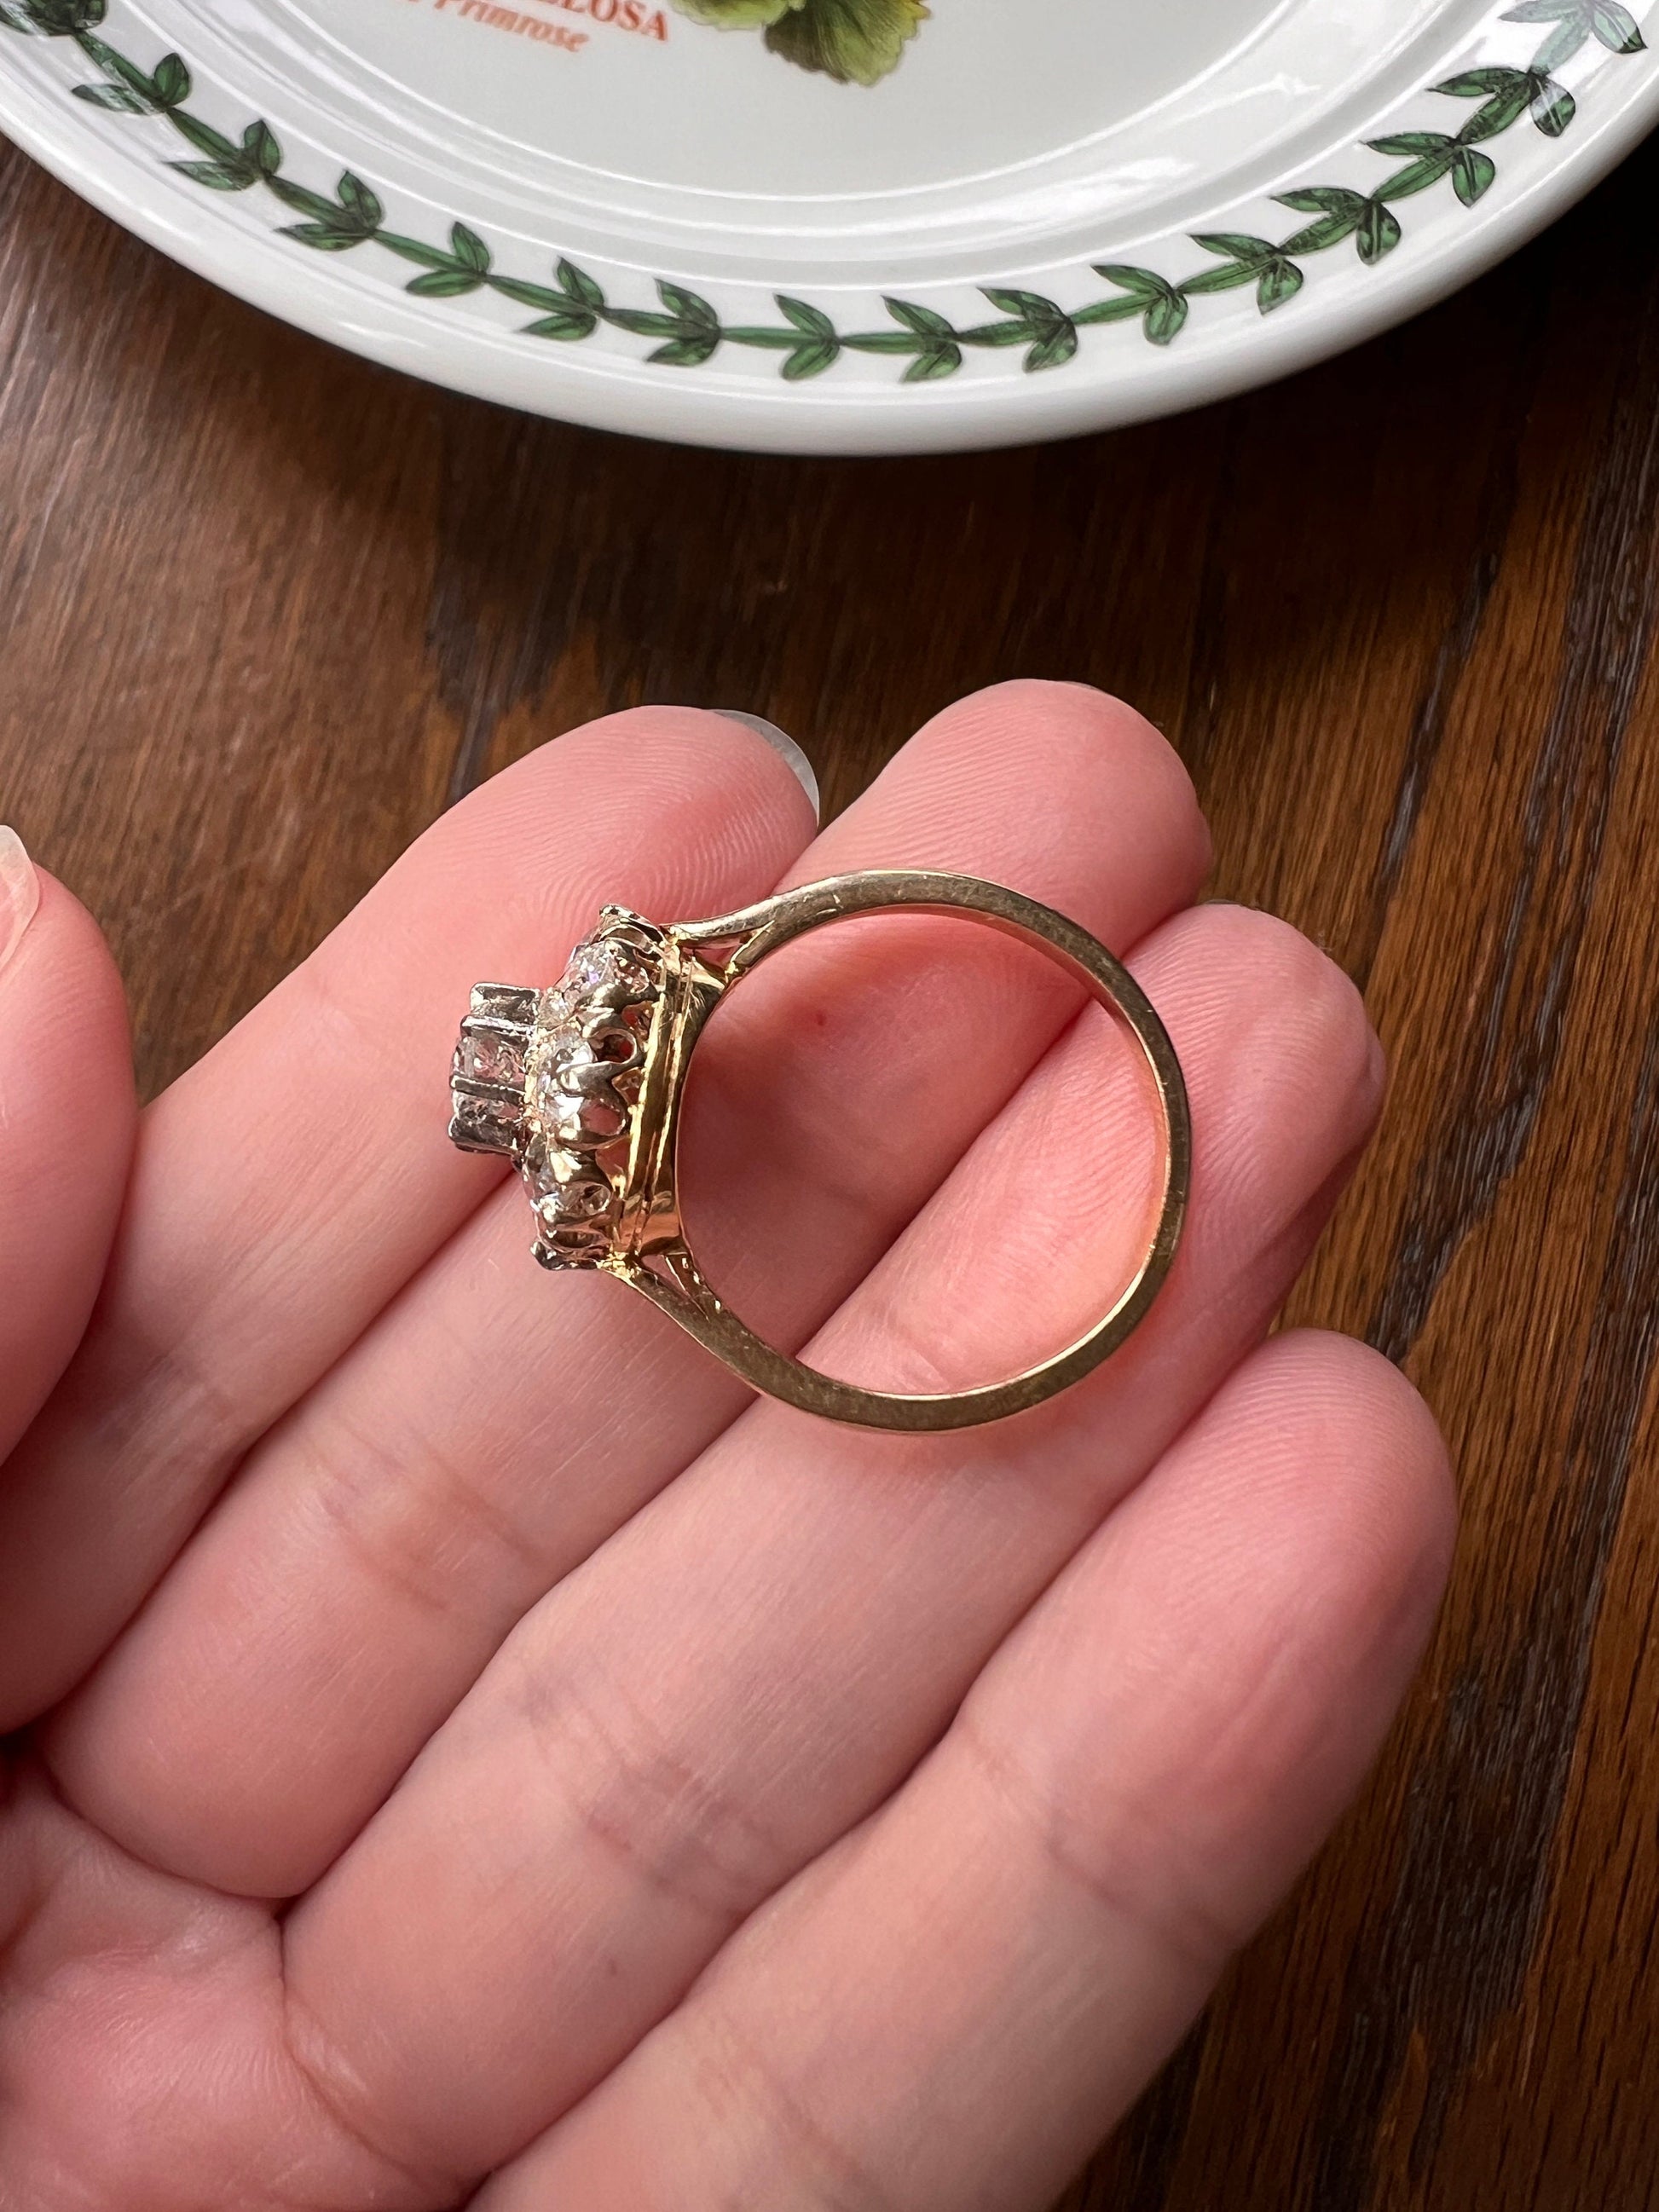 Daisy CLUSTER Ring 1 1/2 Carat Old Mine Cut Diamond Halo 18k Gold French Antique Belle Epoque 1.5Ctw Tdw Romantic Gift OmC Stacker Victorian